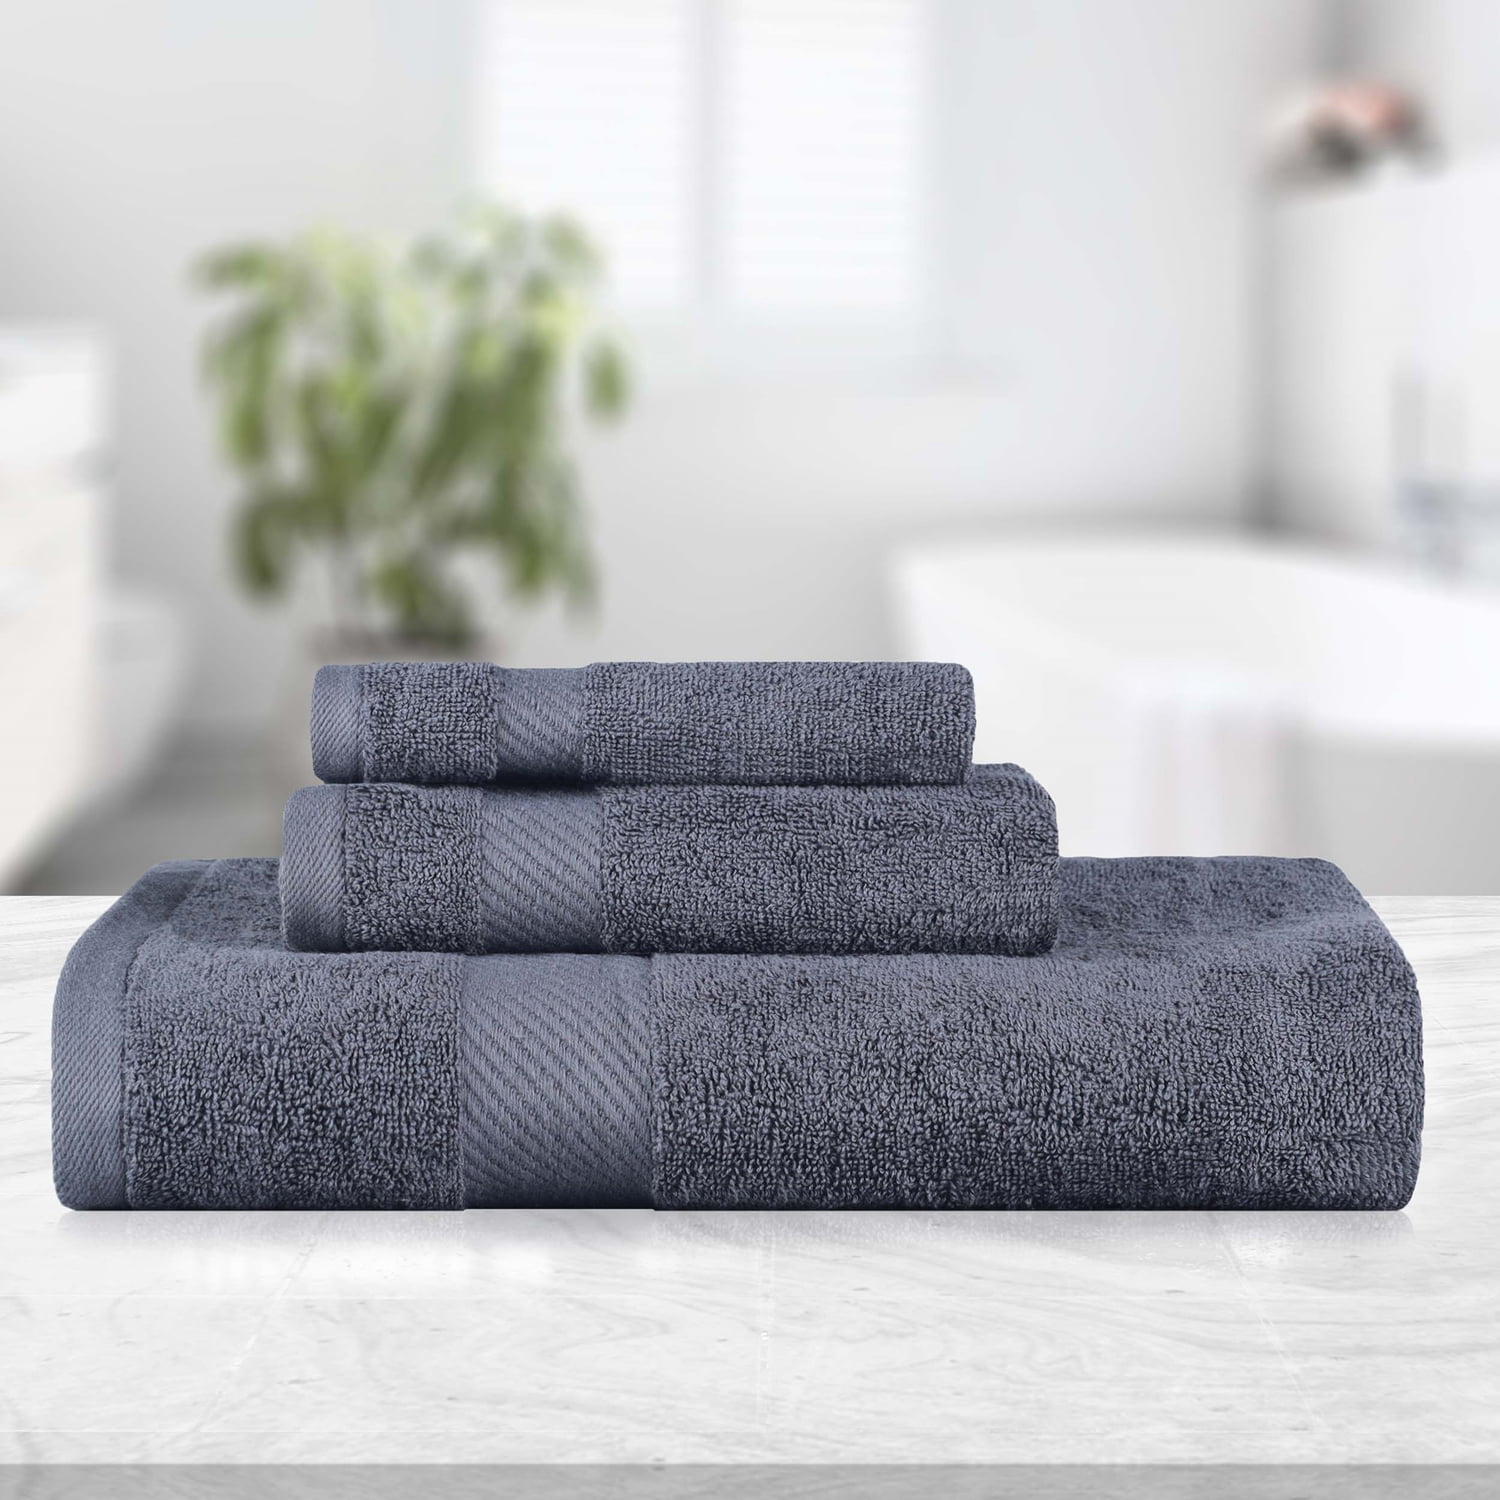 BNM Egyptian Cotton Medium Weight Towels, Assorted Towels For Home  Bathroom, Guest Bath Decor, Essentials, Includes 2 Bath, 2 Hand, 2 Face  Towels/